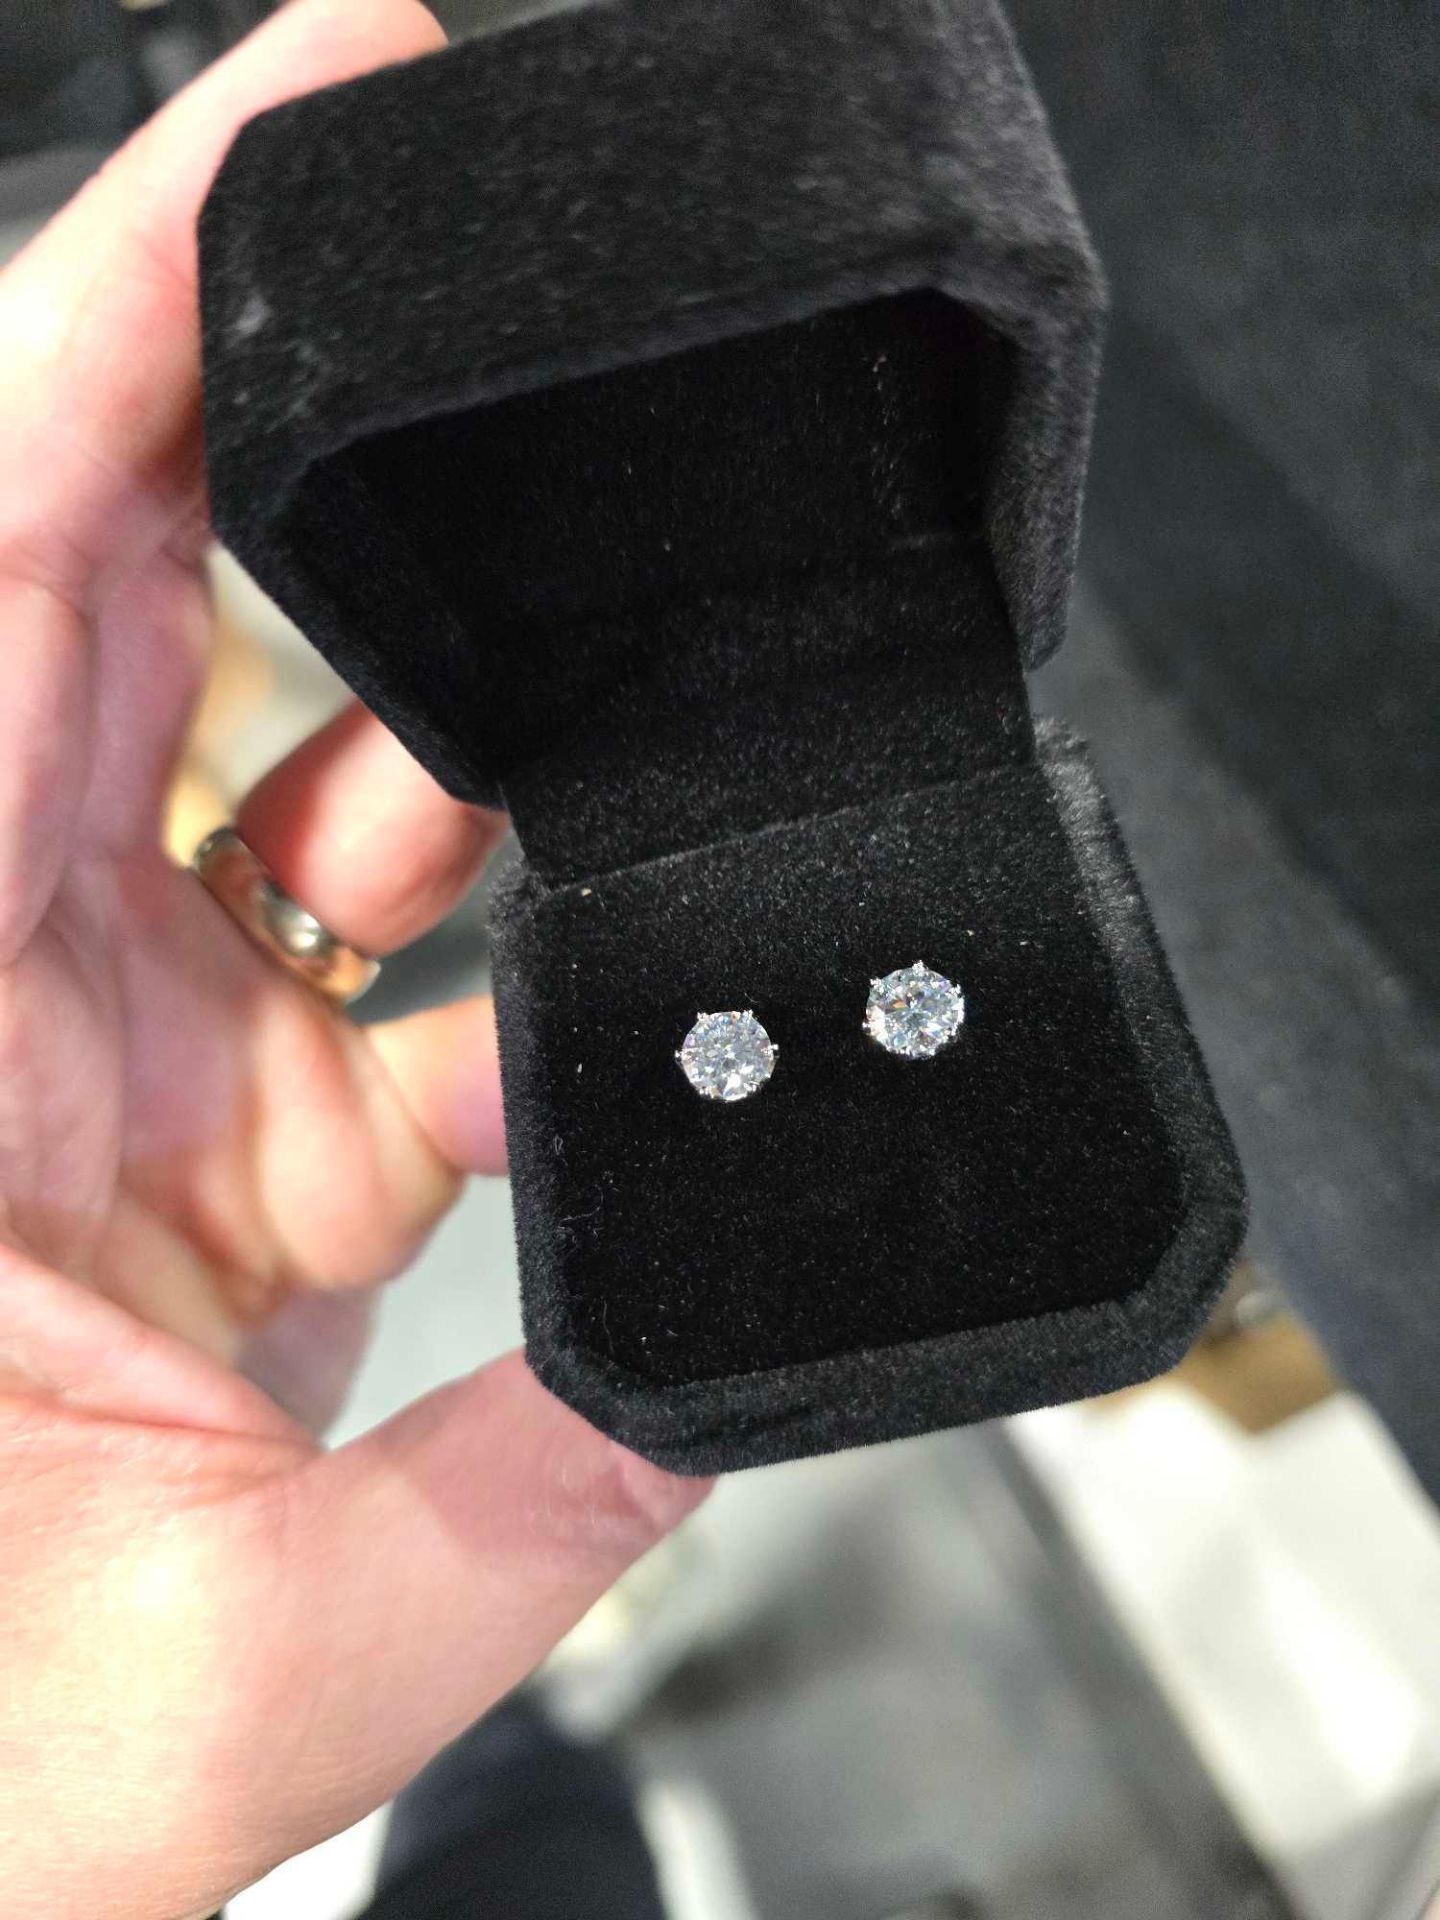 4 Carat Moissanite Sterling Silver Ring size 7, 2 Carat moissanite Sterling silver earrings - Image 3 of 3